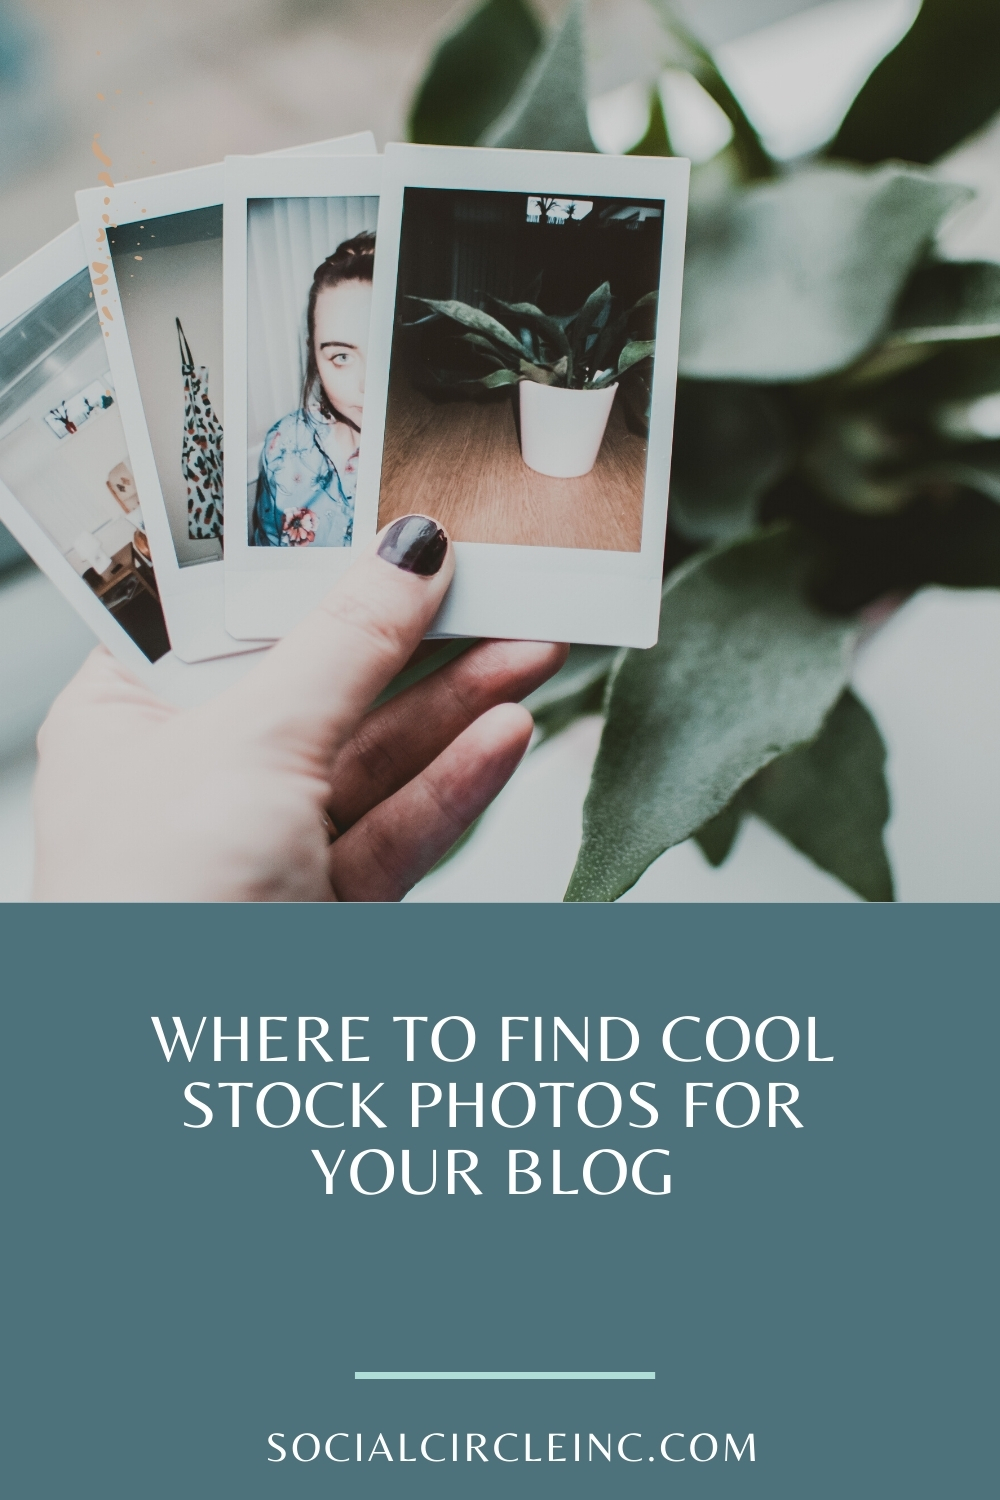 Where to Find Cool Stock Photos for Your Blog